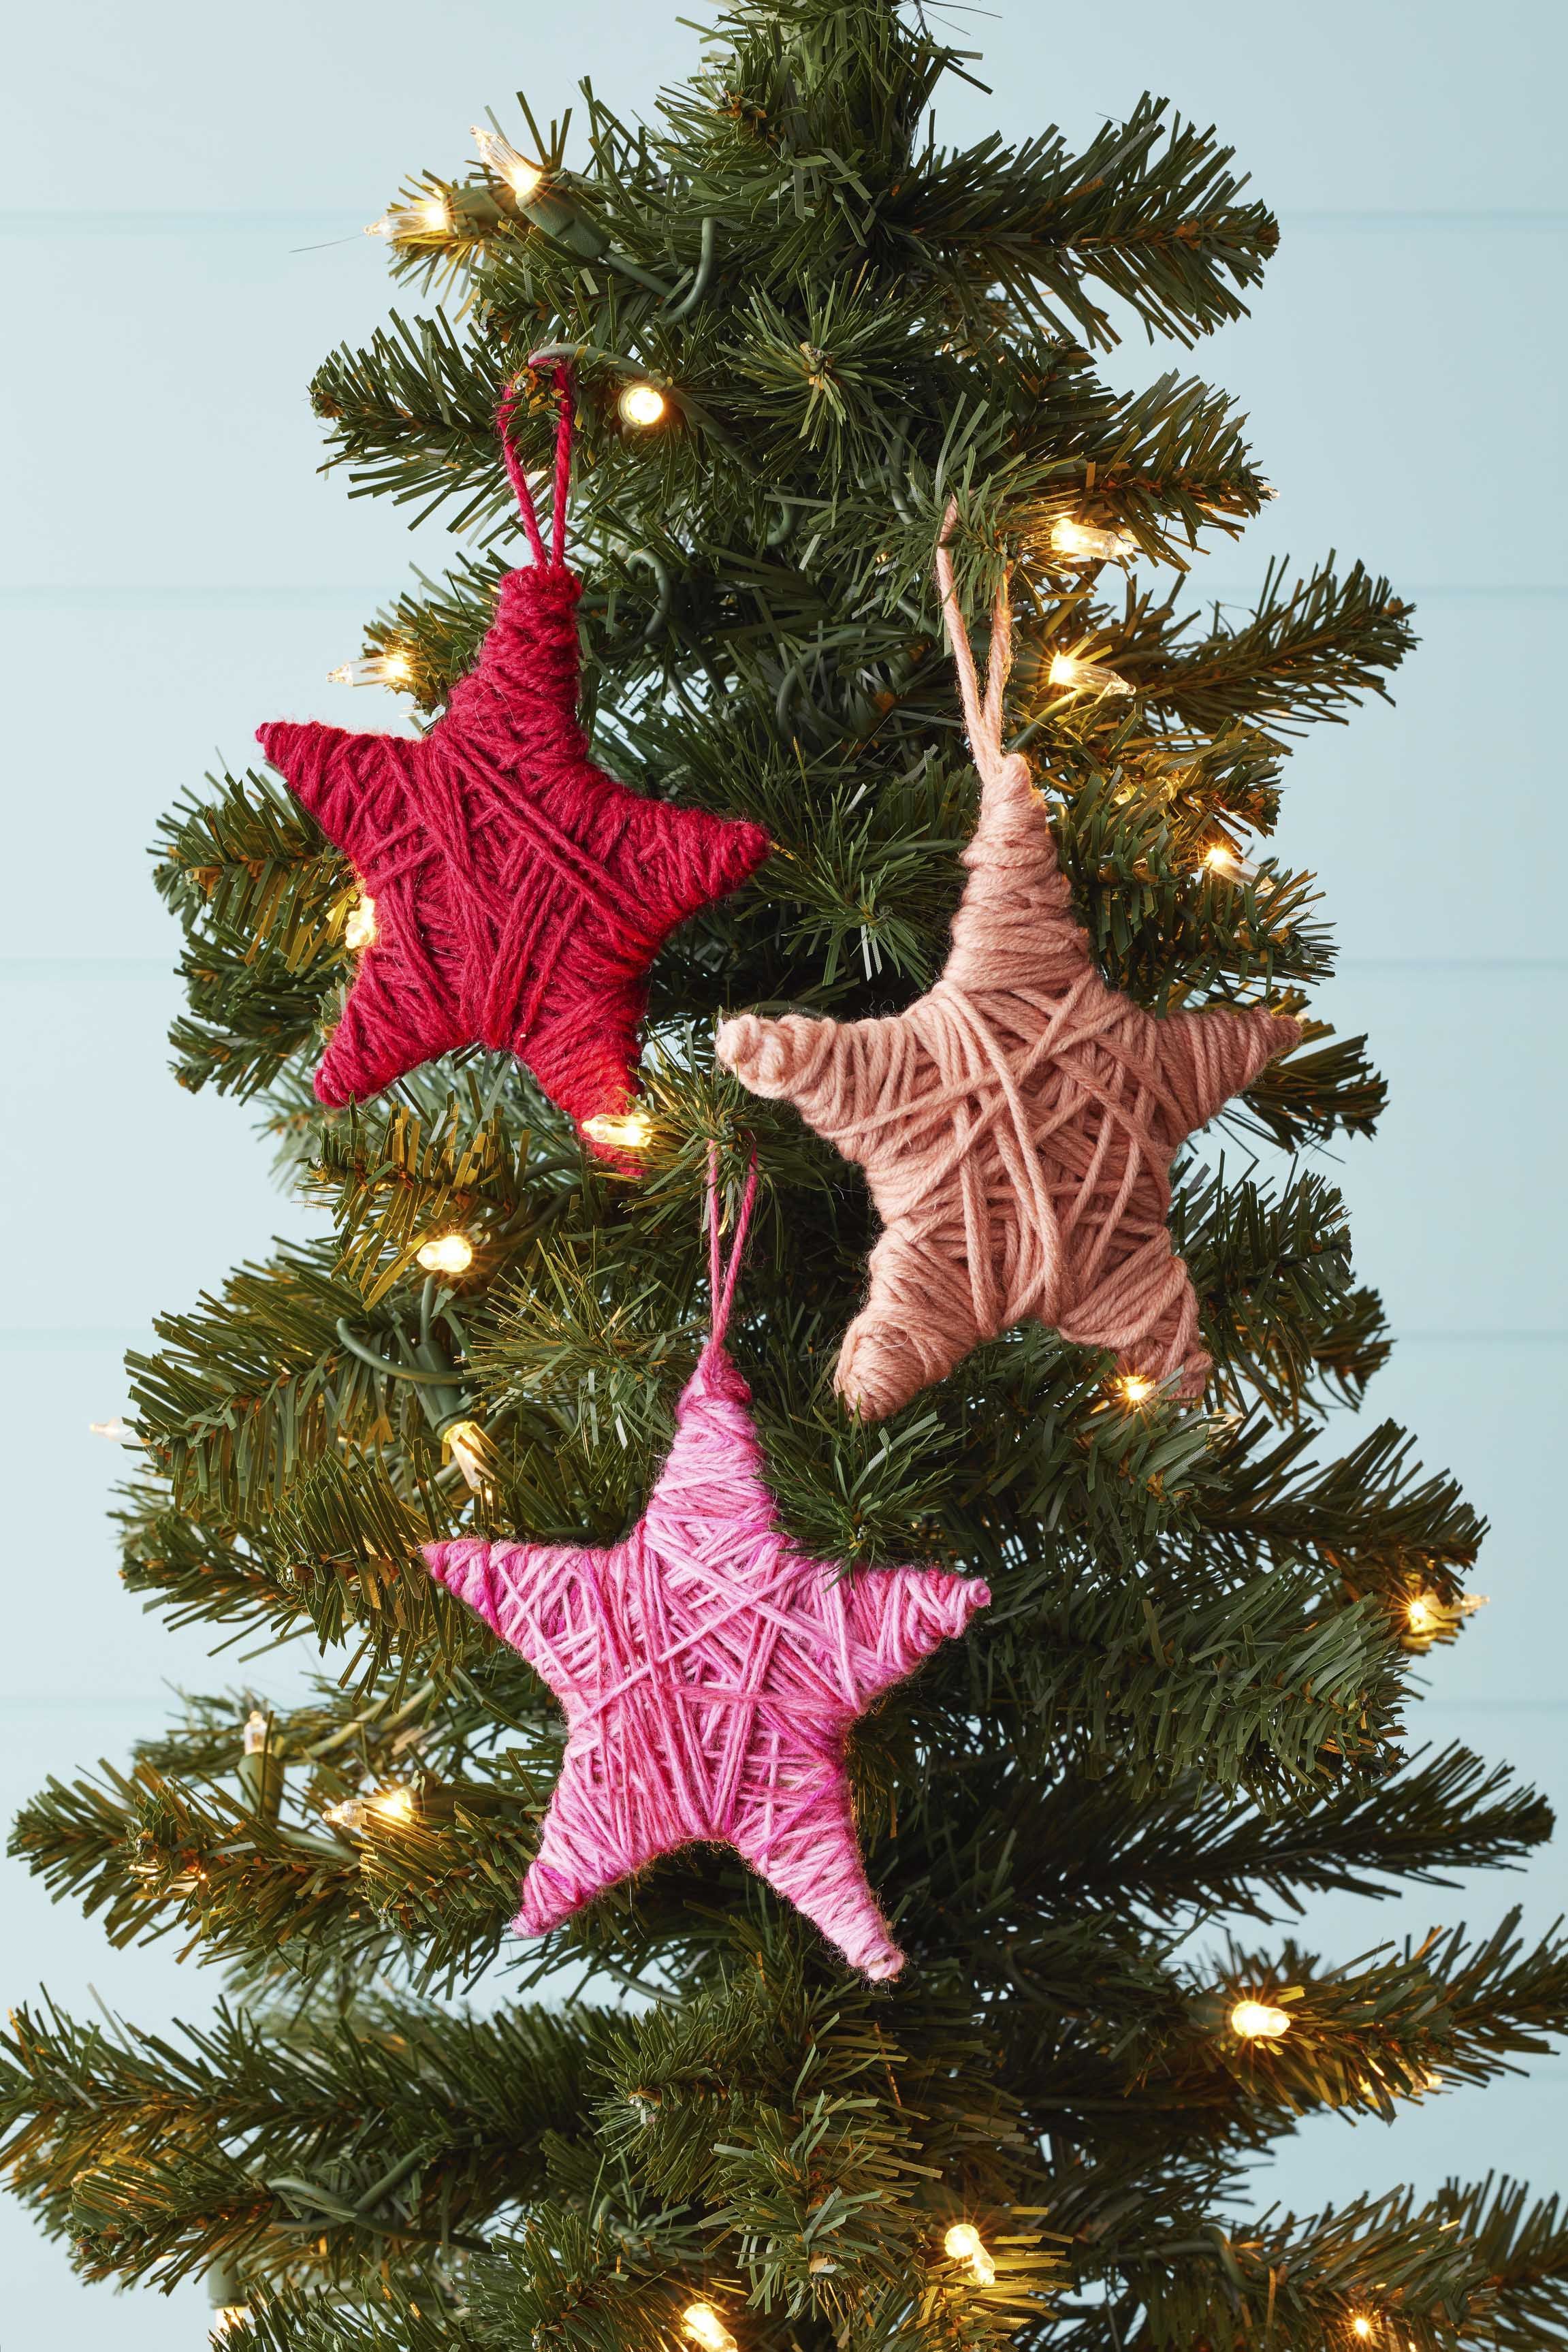 10 Fun and Easy Way to Dress Up Christmas Ornaments - DIY & Crafts